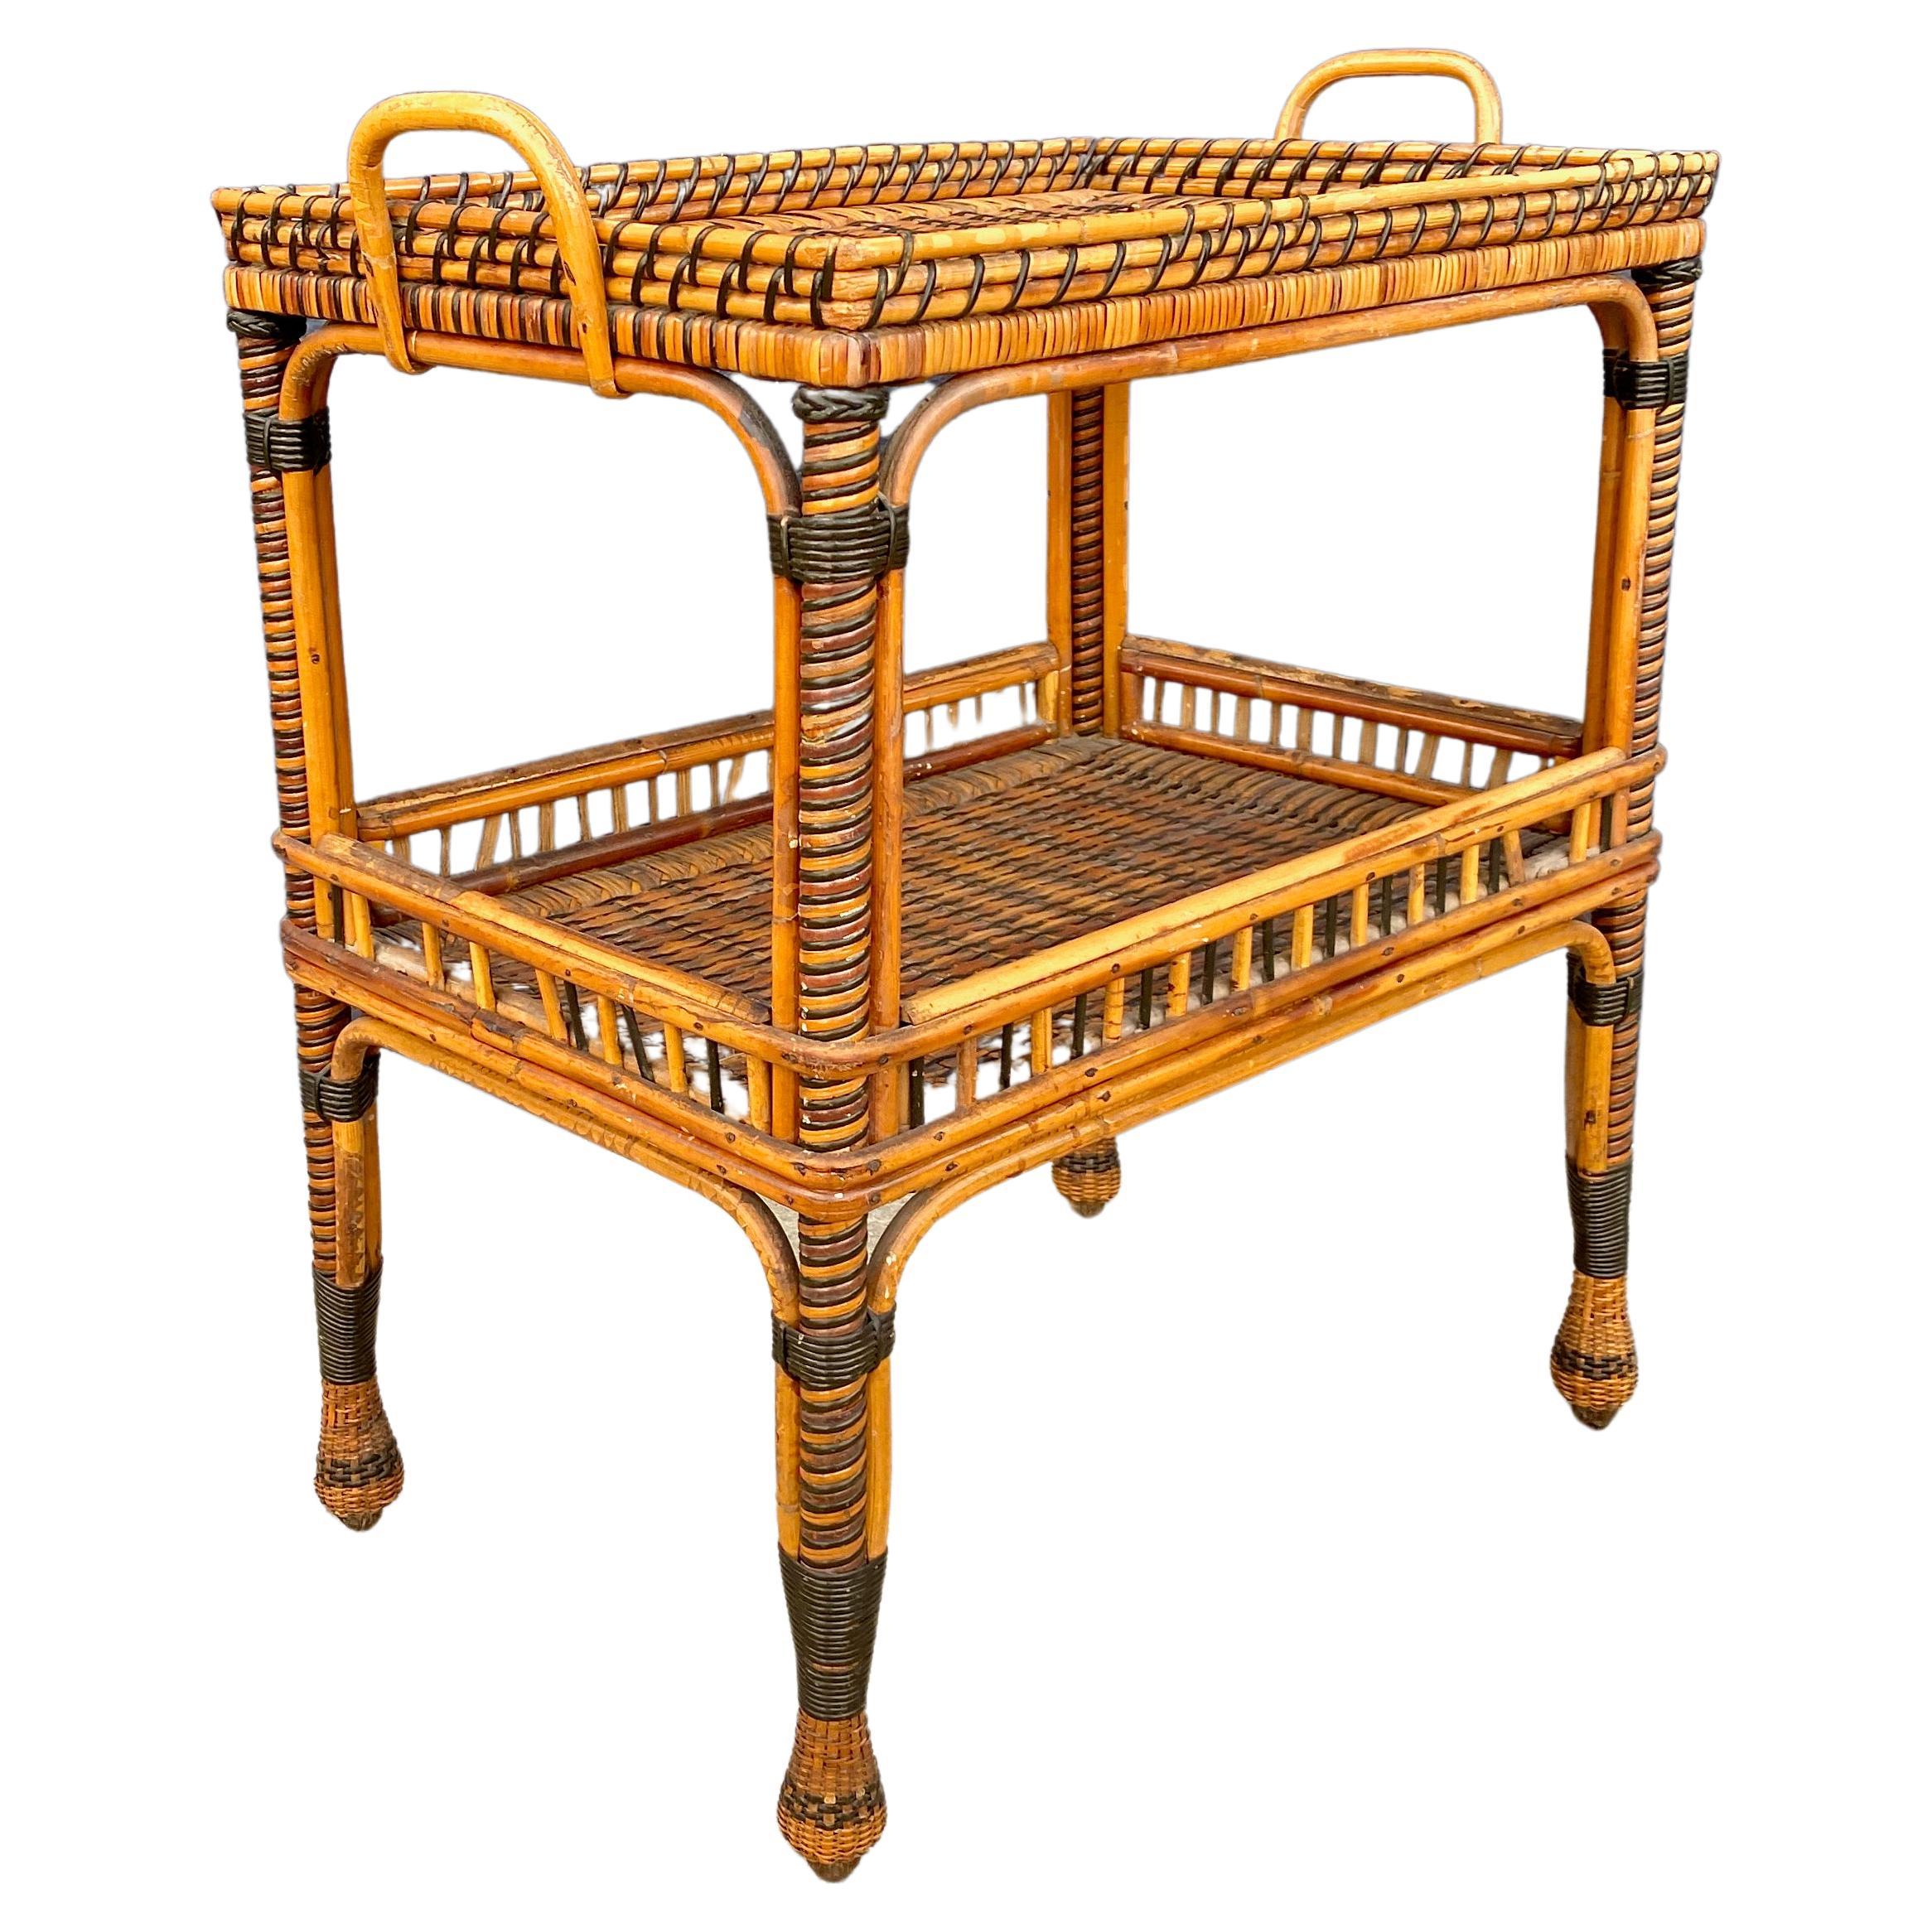 This a beautifully graphic c. 1930's French woven rattan side table. The table features a fixed tray top surface with a coordinating lower shelf. The choice to use both a natural and an ebonized reed in the weaving makes this table a great